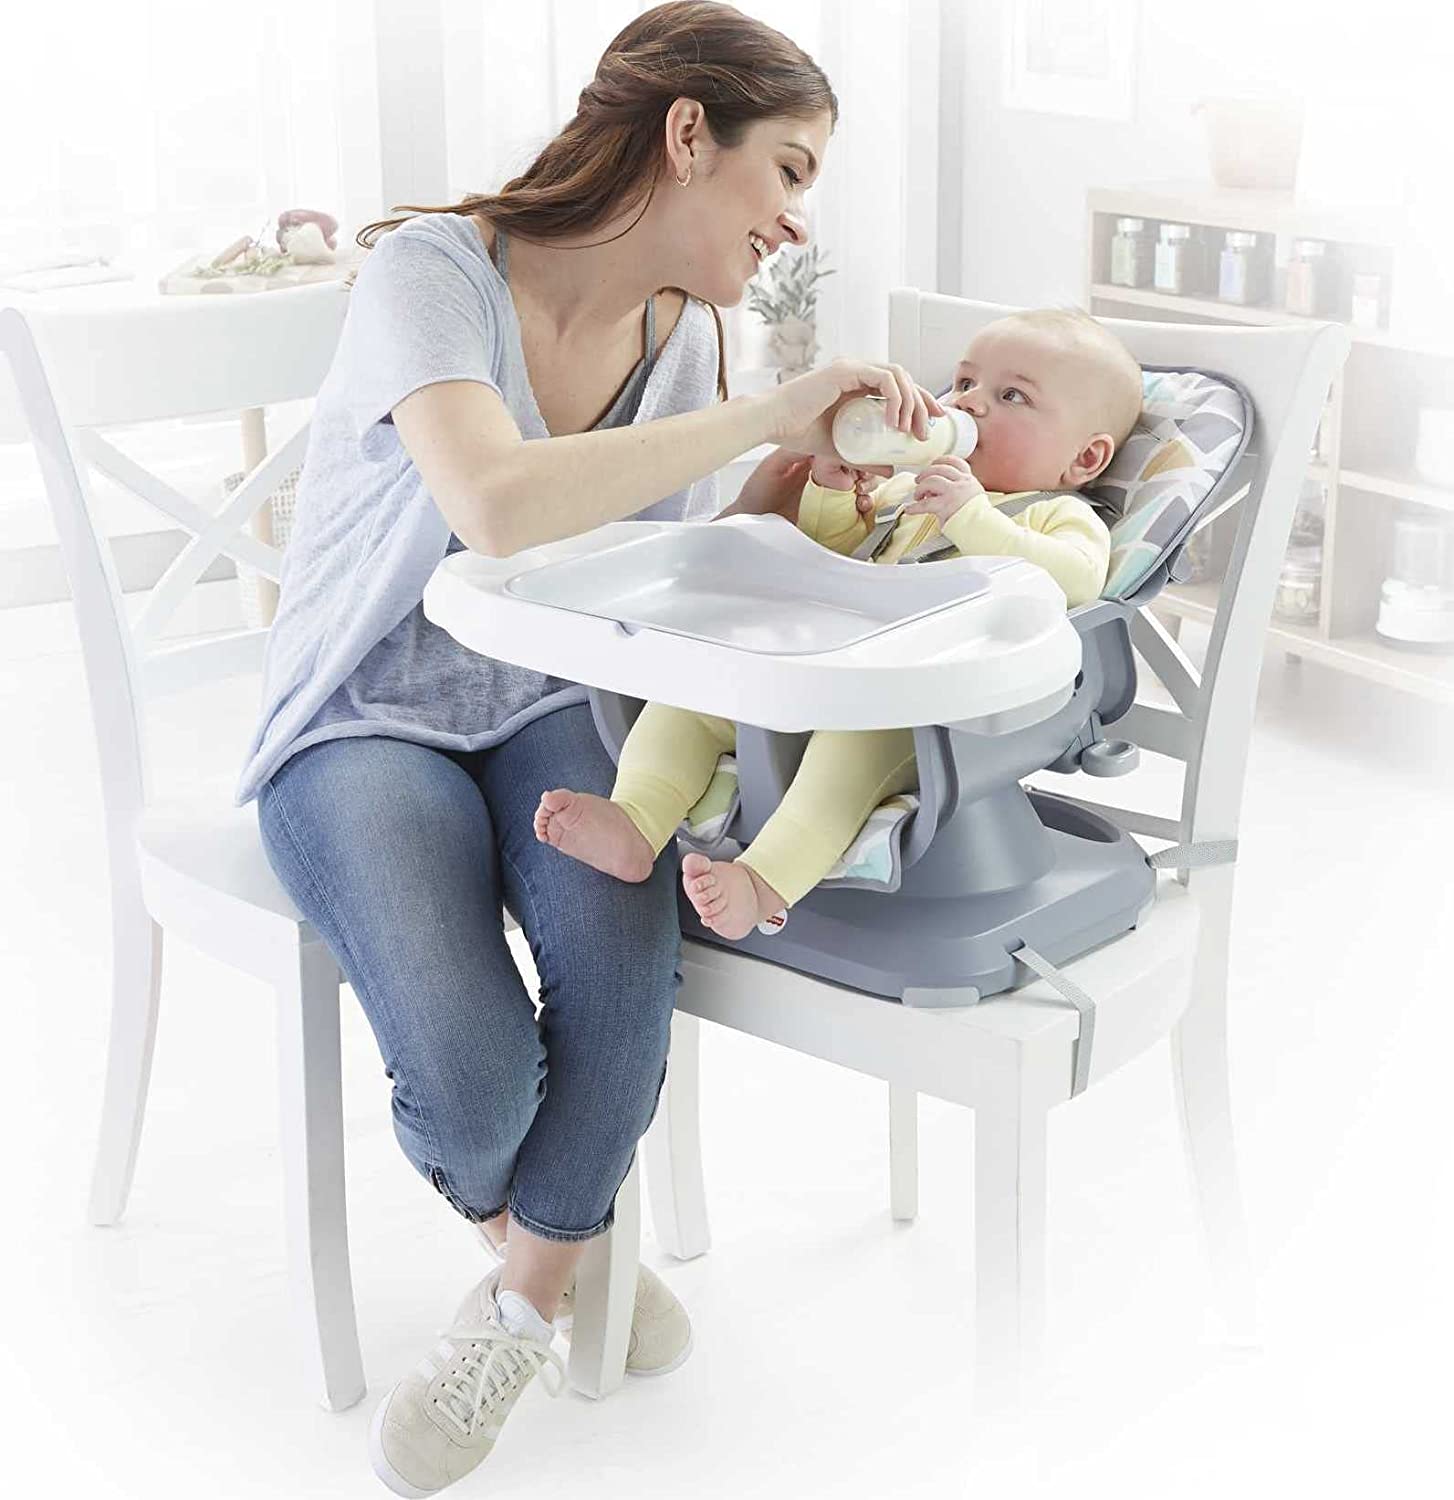 Fisher-Price SpaceSaver High Chair, Slanted Sails - with 2 height adjustments & 3 recline positions